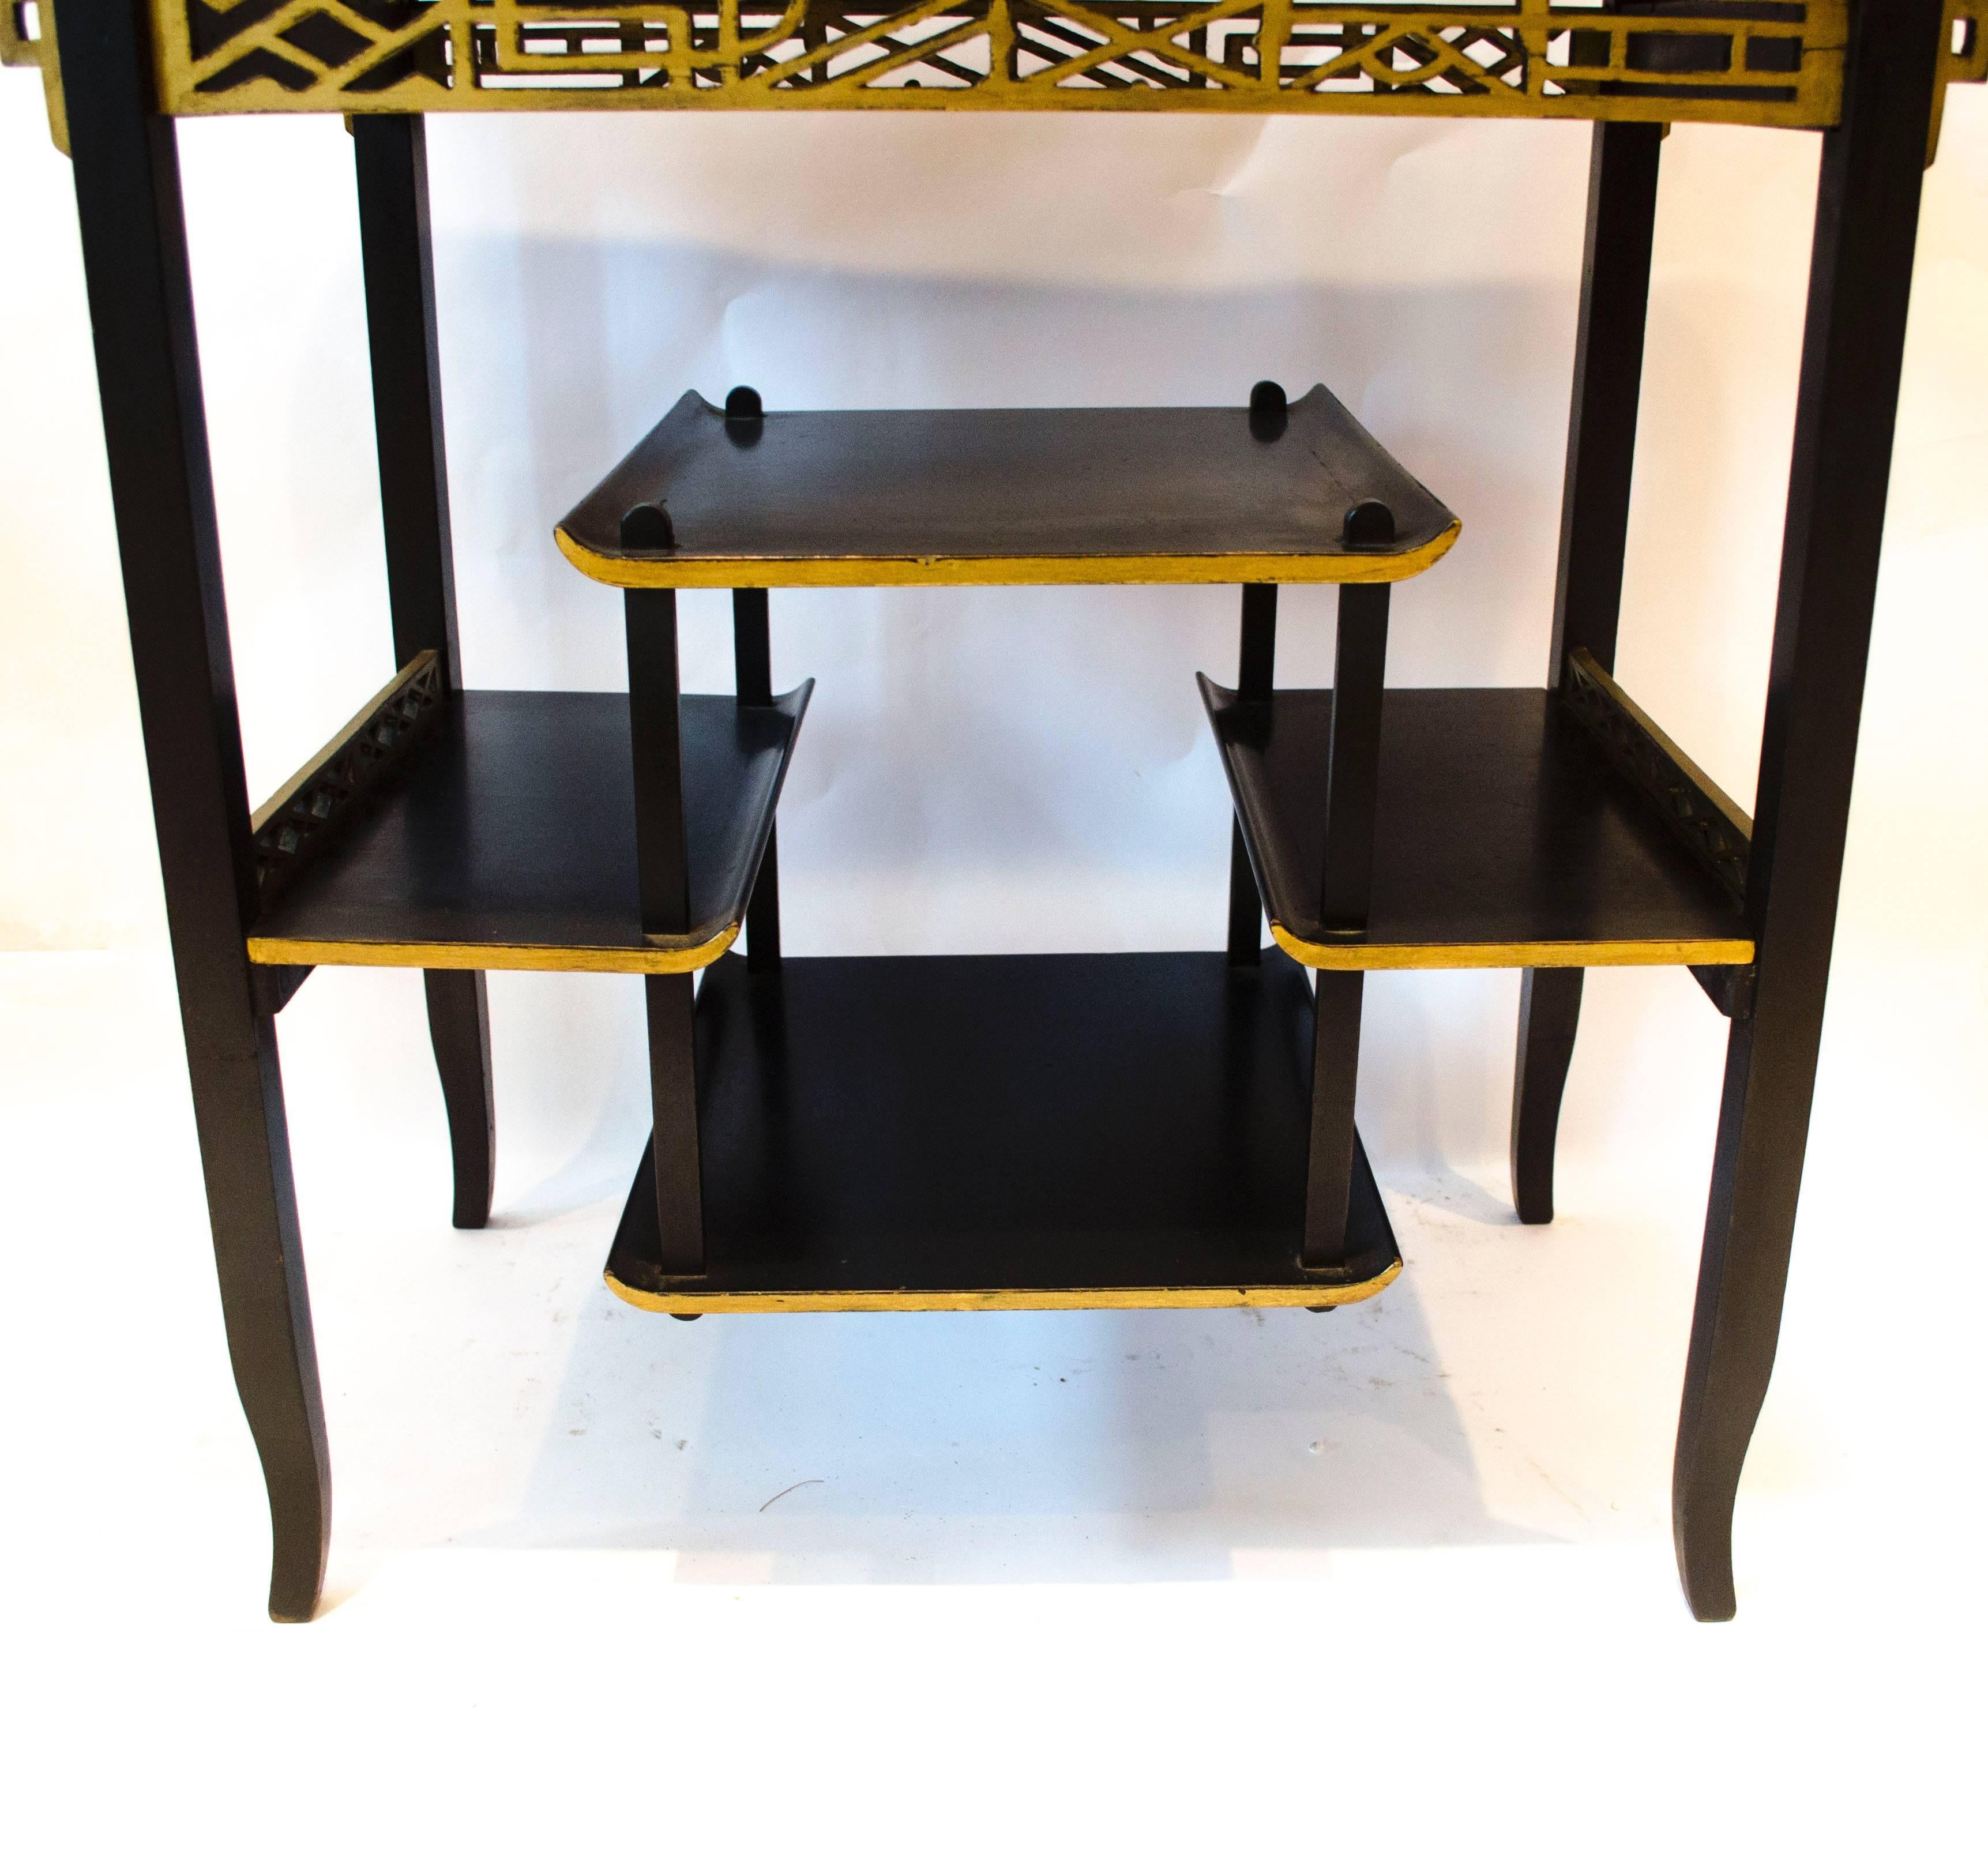 Heals. An Anglo-Japanese side table.
An Anglo-Japanese ebonised and gilt beech wood side table by Heals and Son, with flaring ends, gilt fretwork panels below and four shelves supported through each side in a stepped formation and further gilt